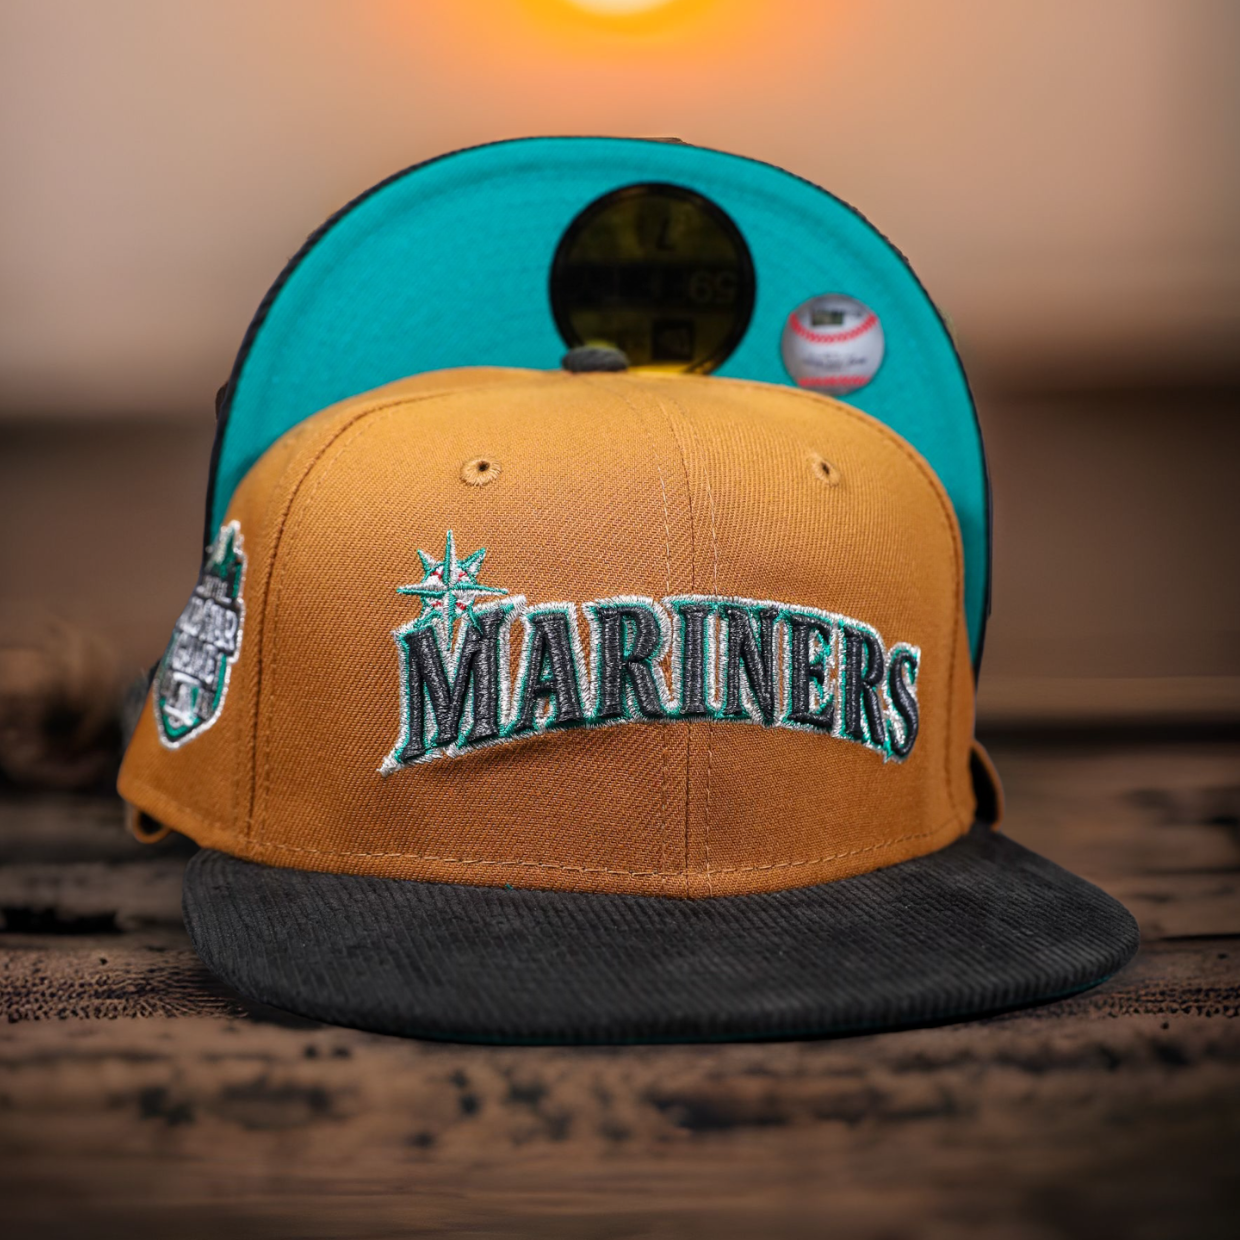 Seattle Mariners 2023 MLB All Star Game Collectible Patch